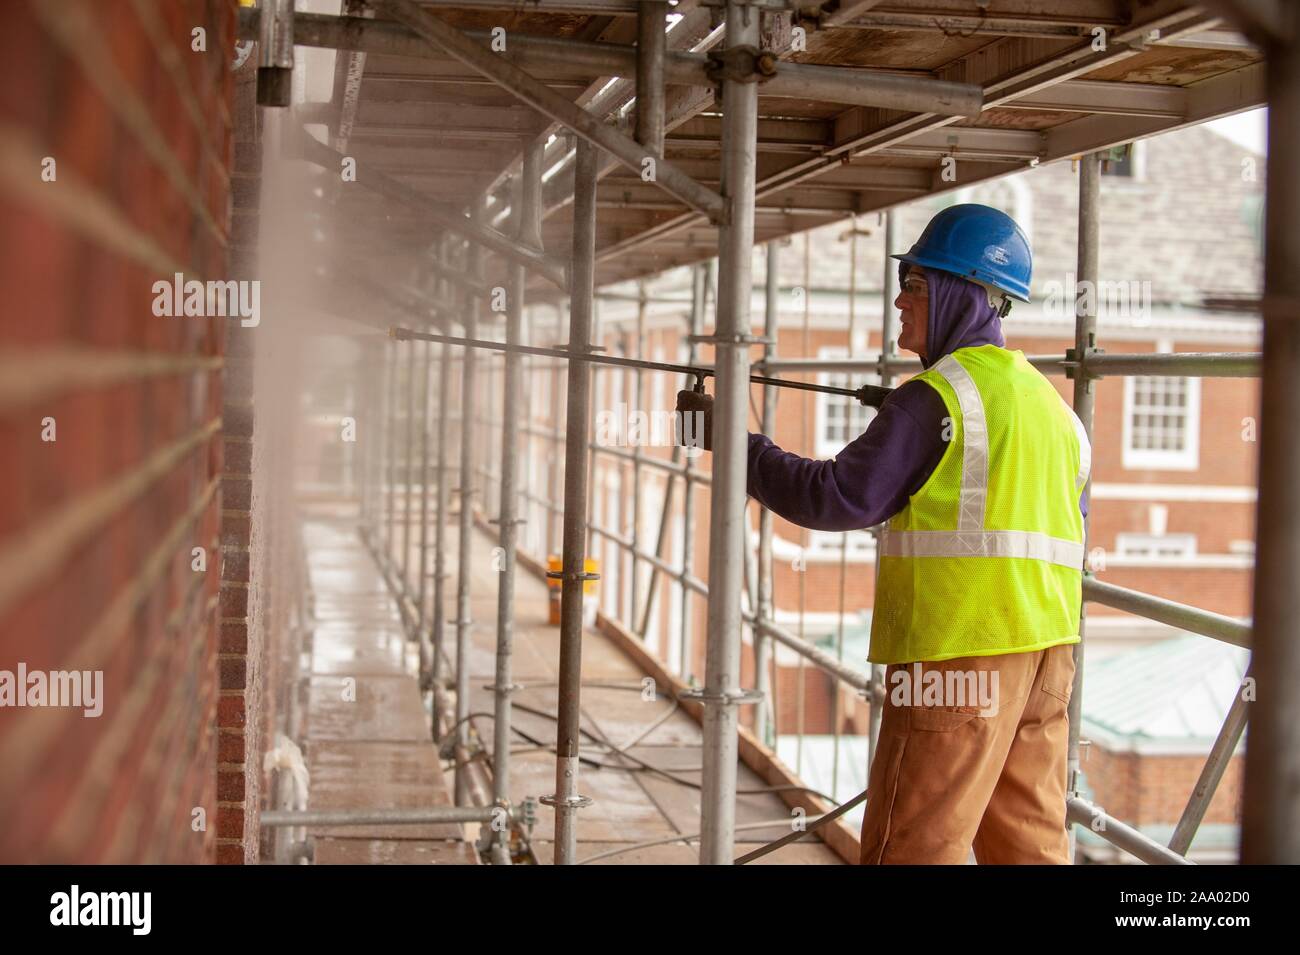 A person wearing safety gear and standing on a scaffold, uses a spray gun while working on the exterior of Gilman Hall, on a cold day at the Johns Hopkins University, Baltimore, Maryland, March 11, 2009. From the Homewood Photography Collection. () Stock Photo